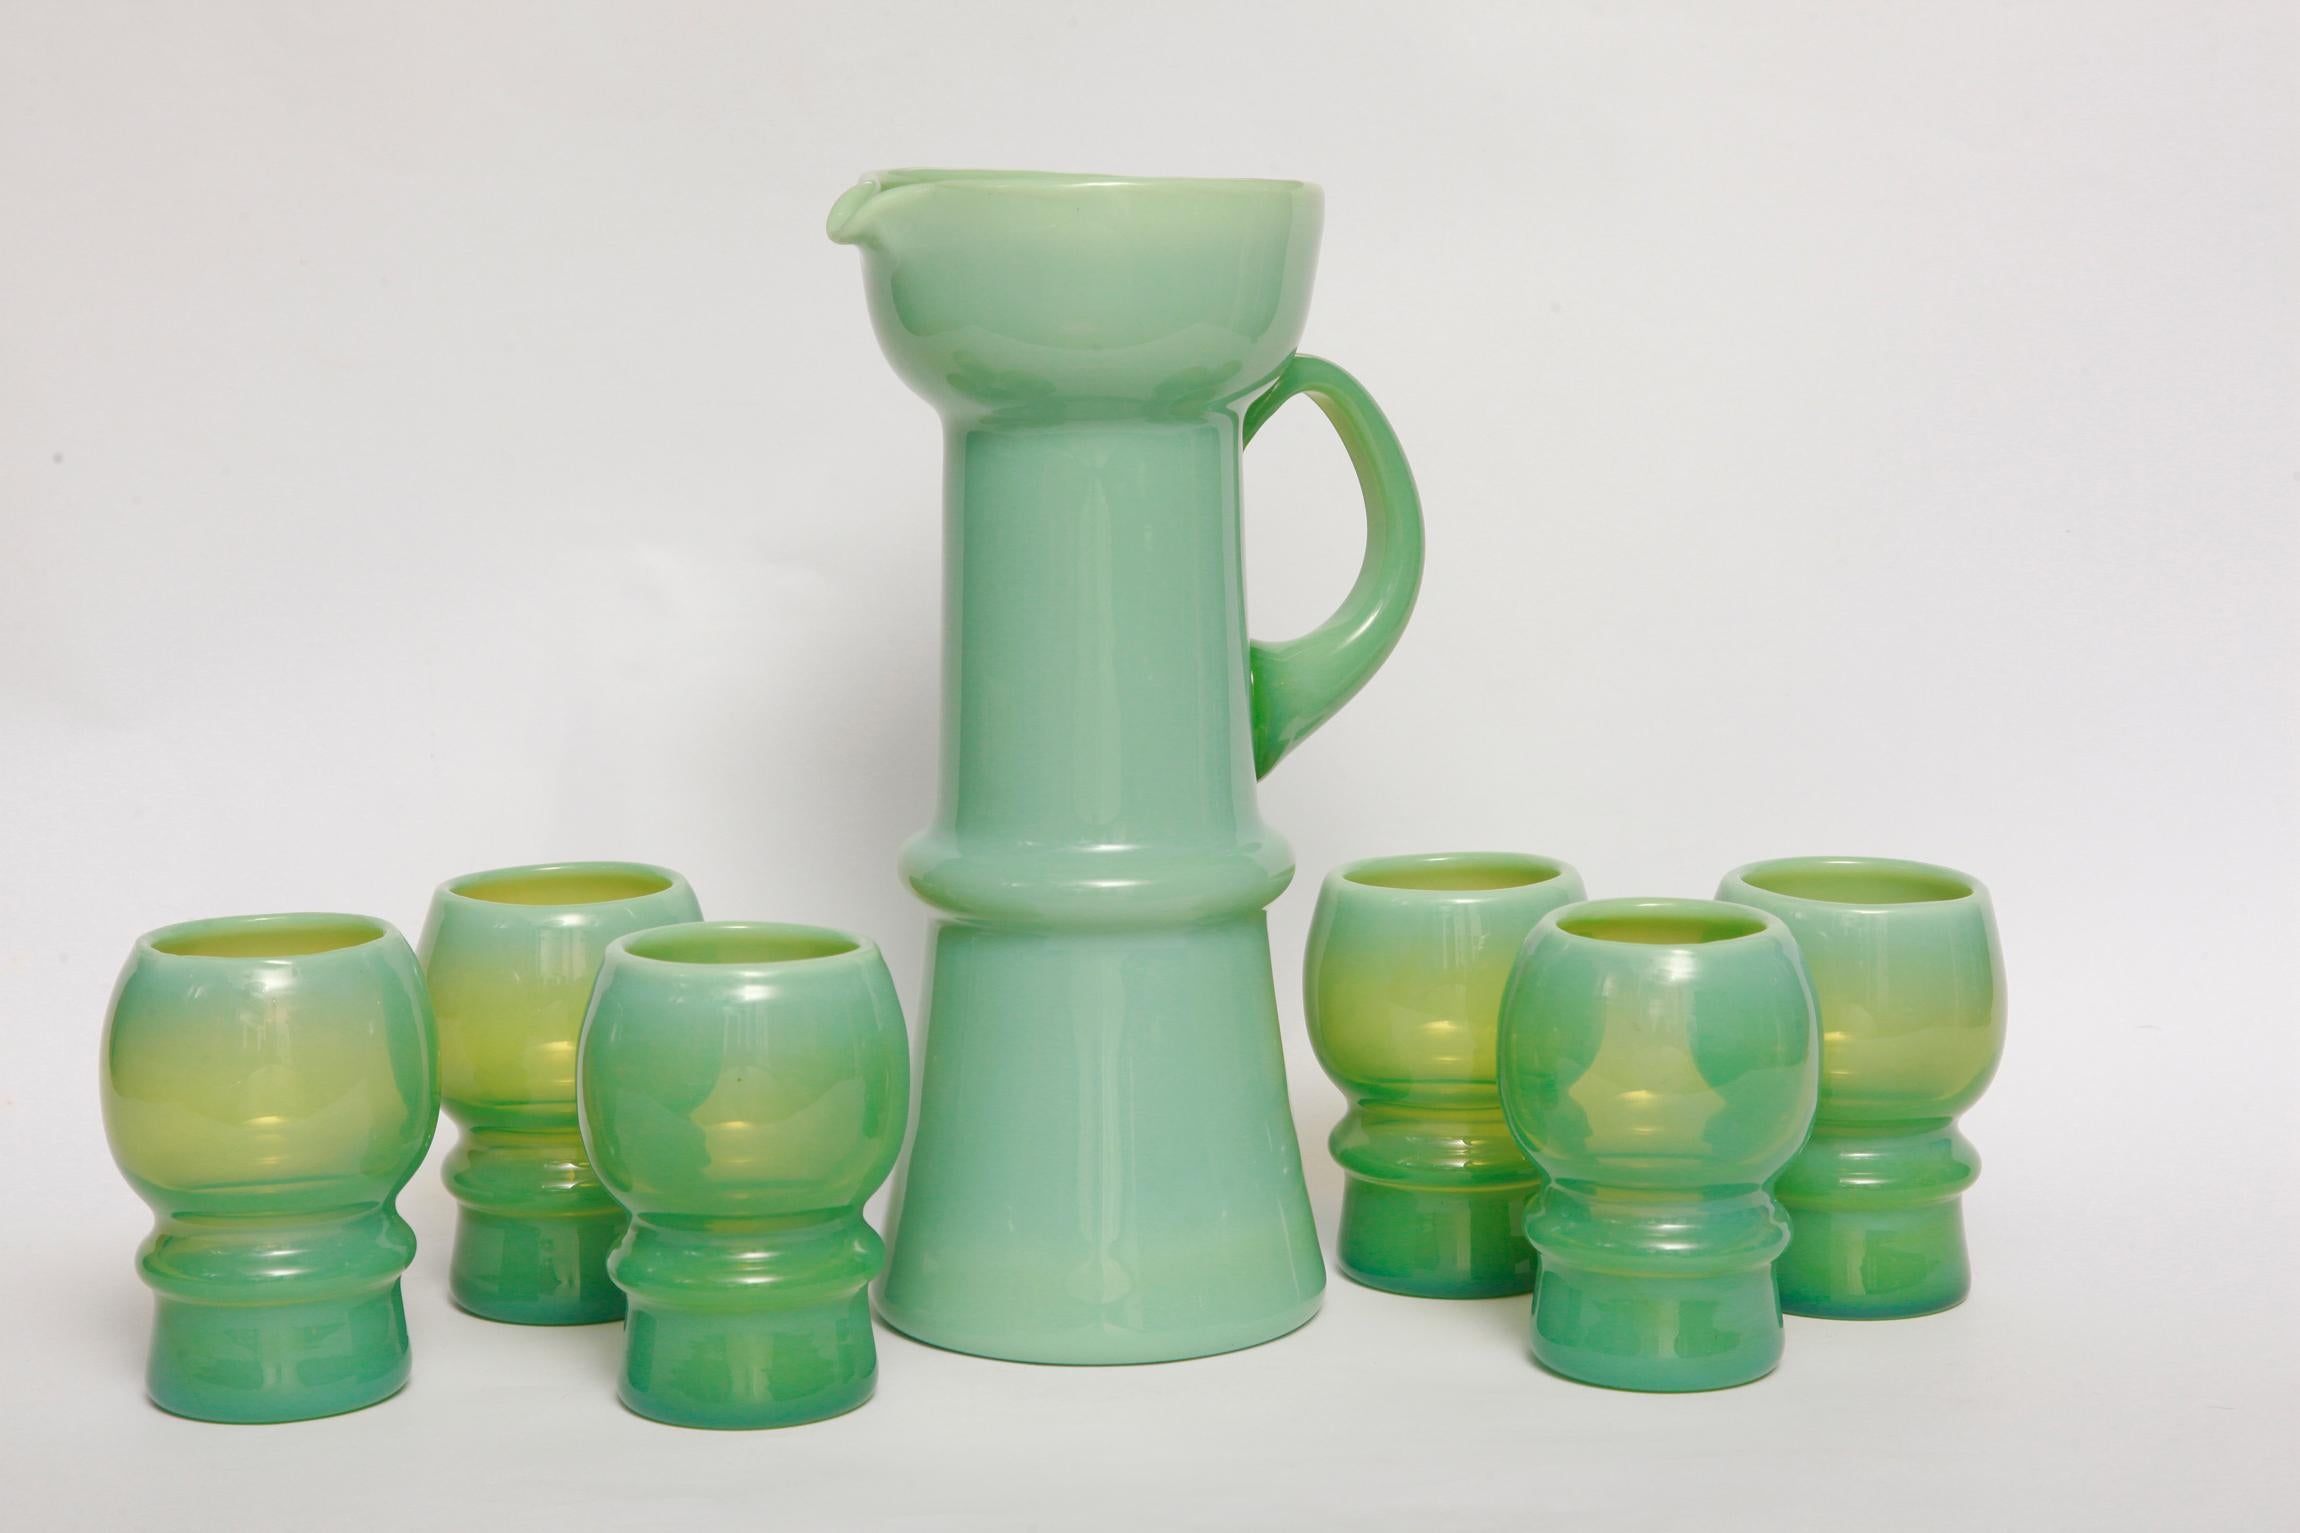 A glass set - a jug and six glasses designed by Zbigniew Horbow, from the 1960s. It is a beautiful and unique set of soda glass which is a decoration of every kitchen. Made of colored glass in the mass. The set has a very rare color.

Zbigniew